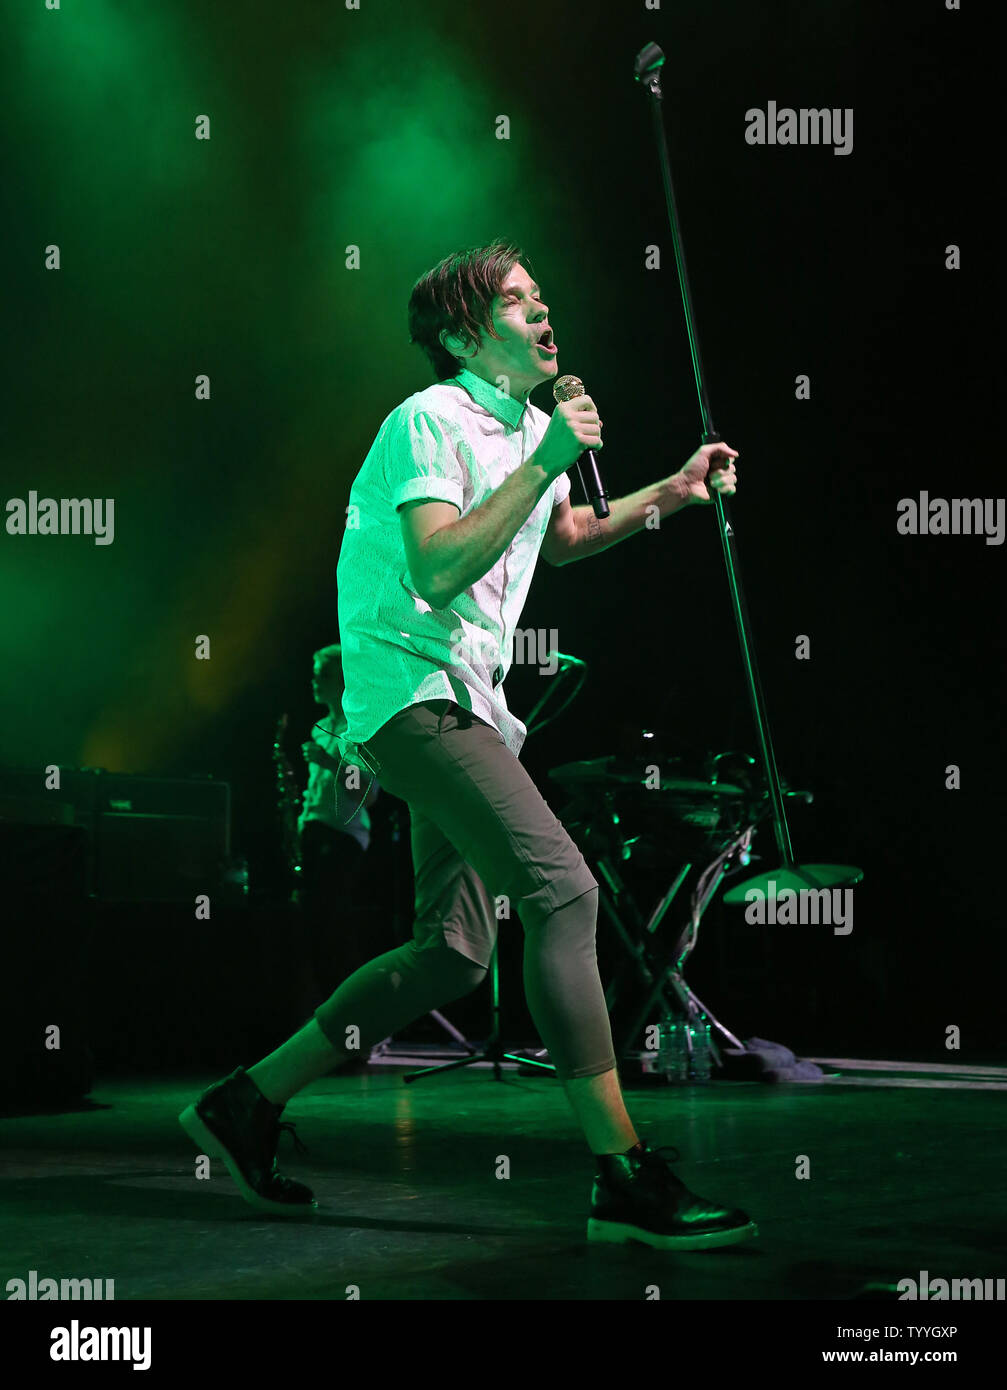 Spelling mengen avontuur Nate Ruess of the American indie pop band Fun performs in concert at  Olympia Hall in Paris on June 20, 2013. UPI/David Silpa Stock Photo - Alamy